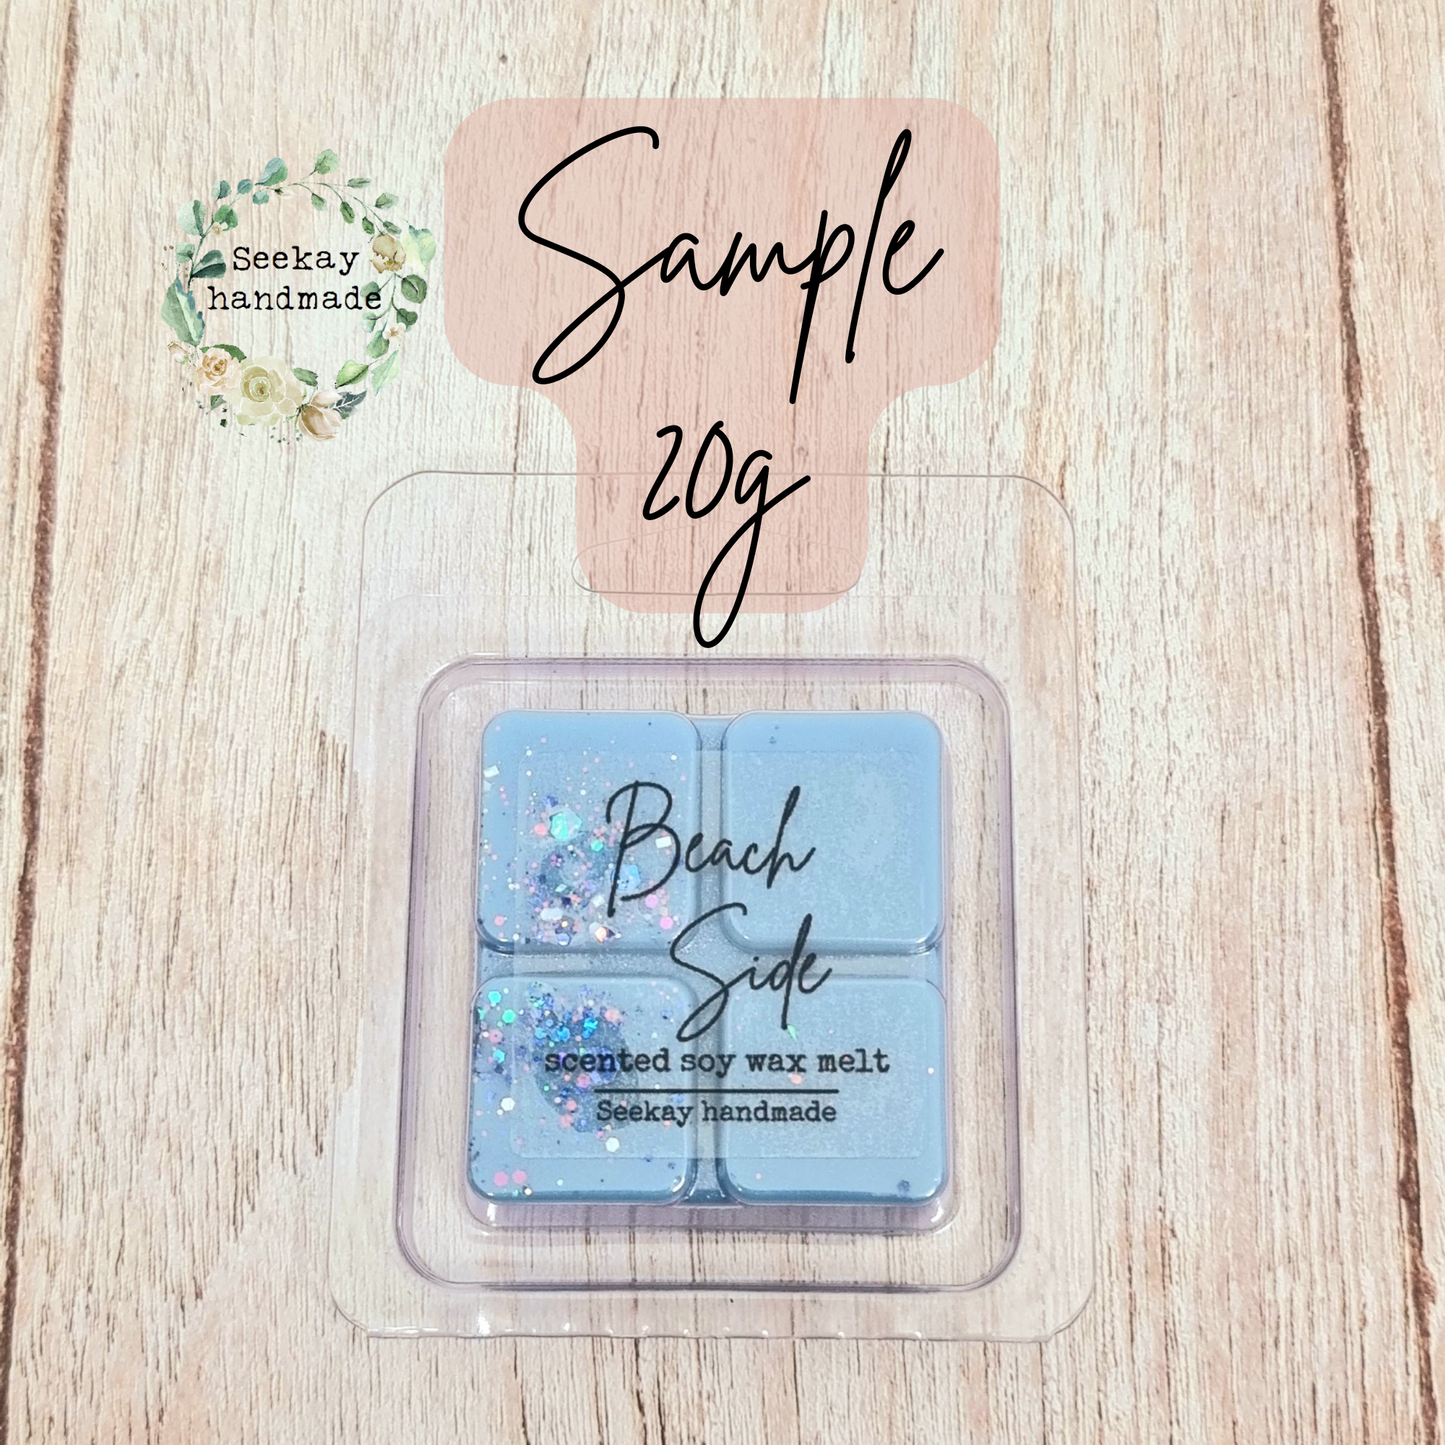 Beach Side scented soy wax melt